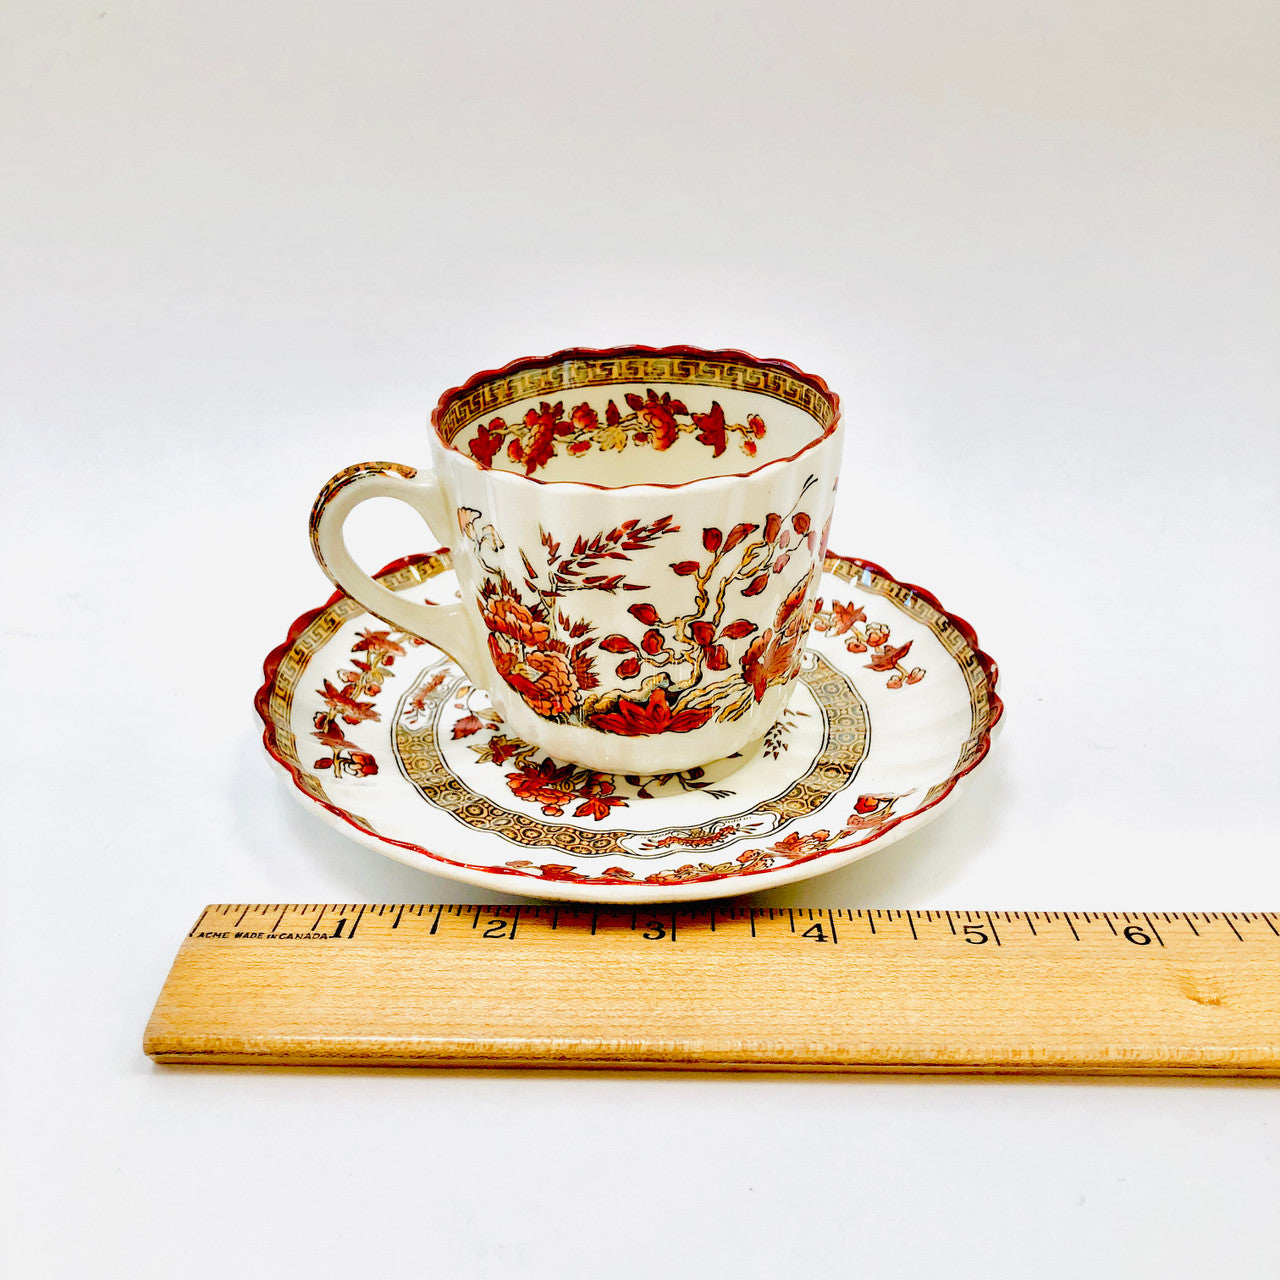 Spode Copeland India Tree Cup and Saucer, Teacup and Saucer, Tea cup and Saucer, Vintage, Antique